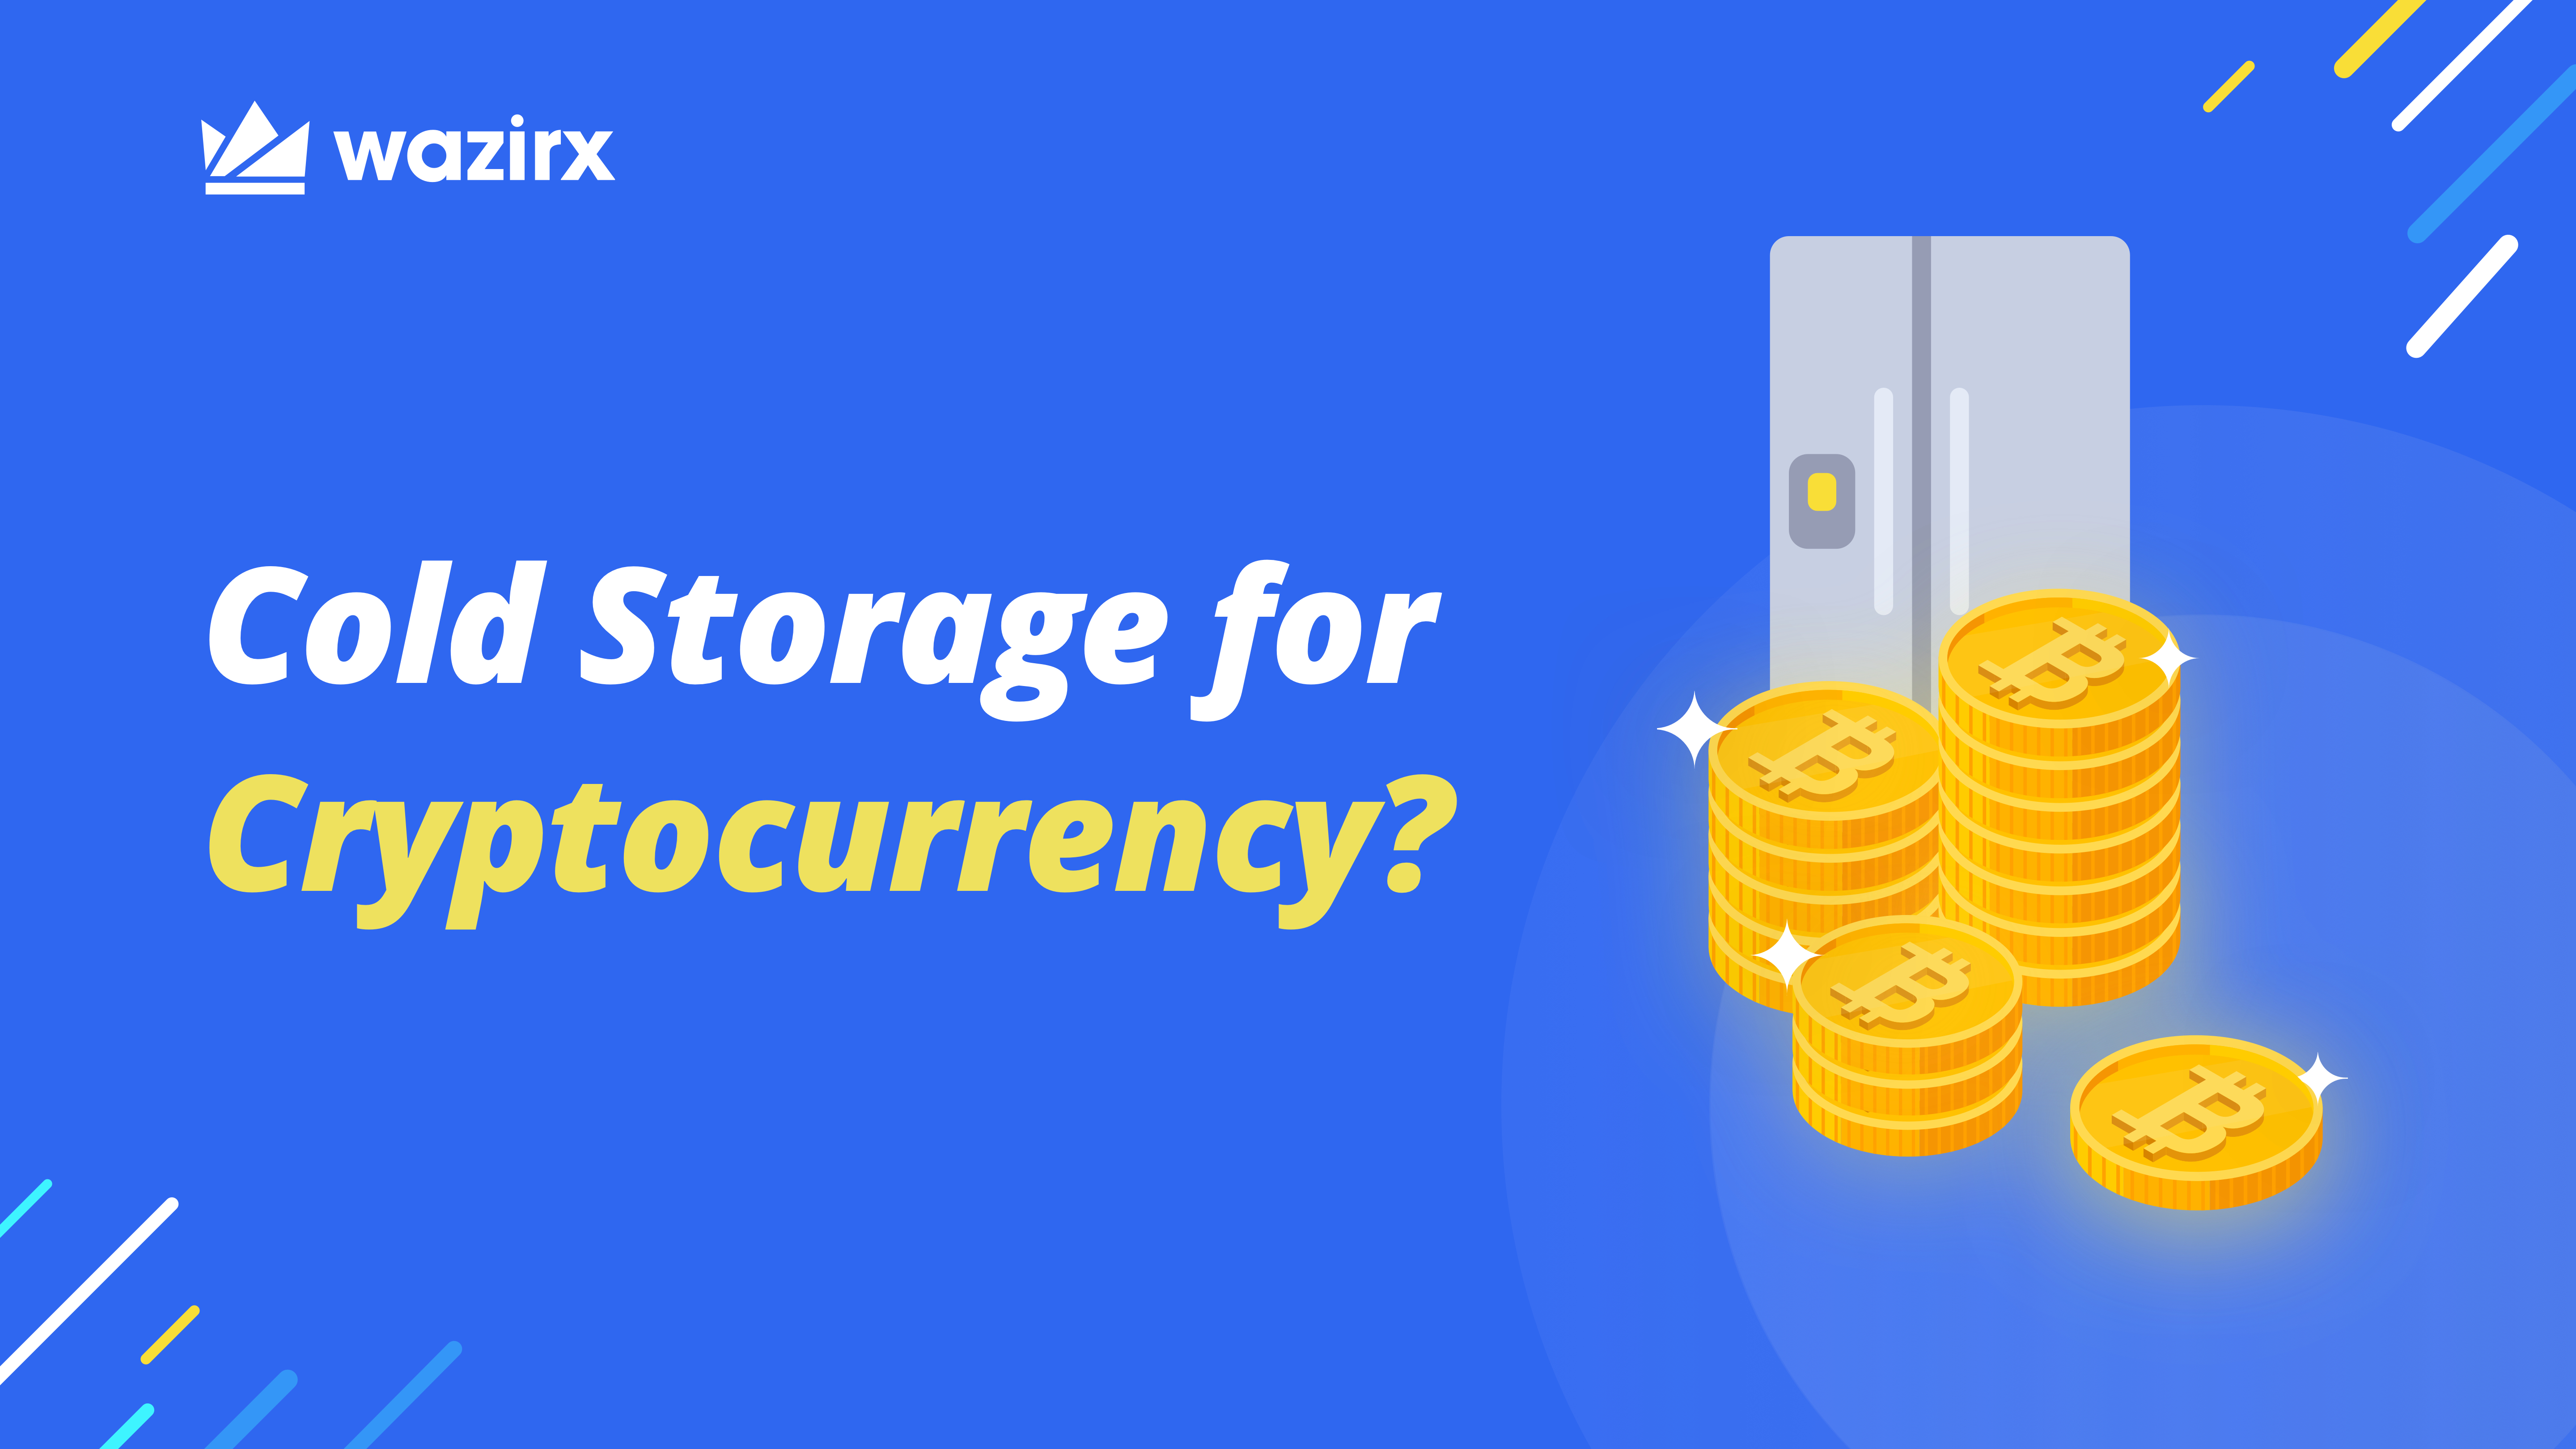 What is Cold Storage for Cryptocurrency? - WazirX